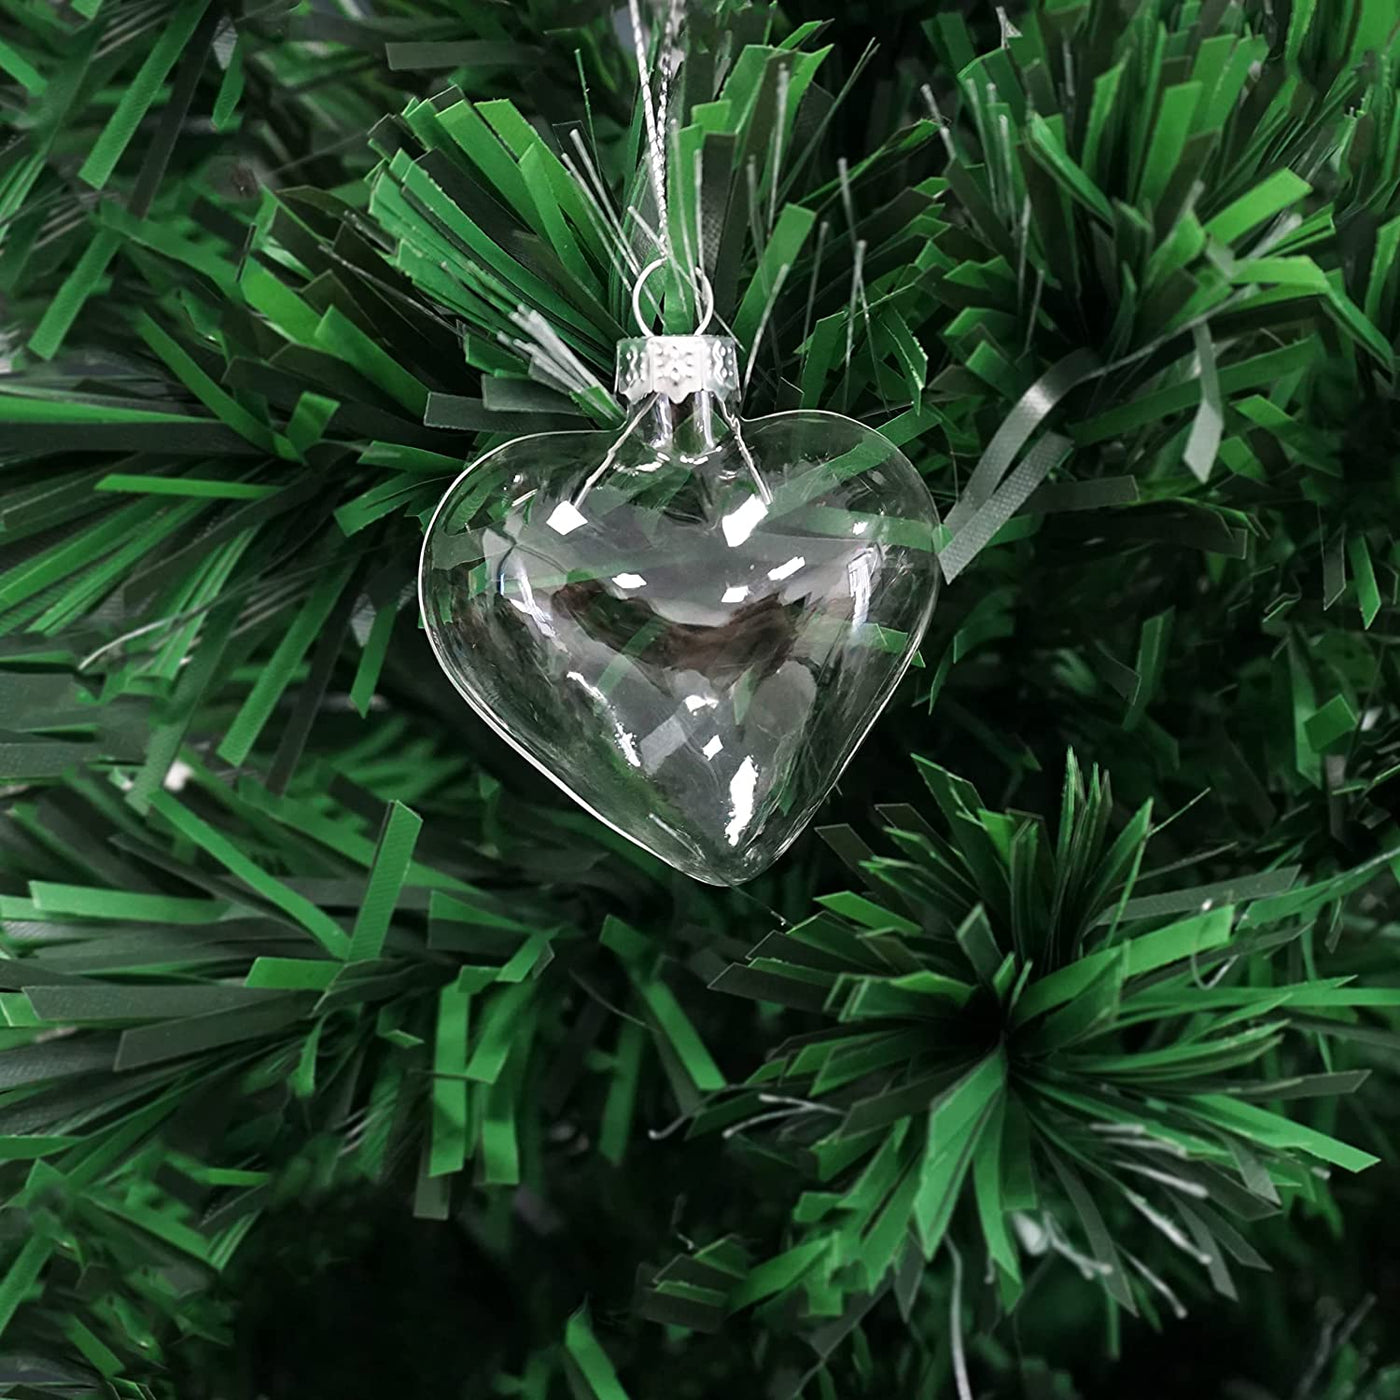 12 Pcs Fillable Glass Heart Ornaments for Crafts 60mm/2.36" for DIY Clear Ornaments for Valentines Day Tree Decoration